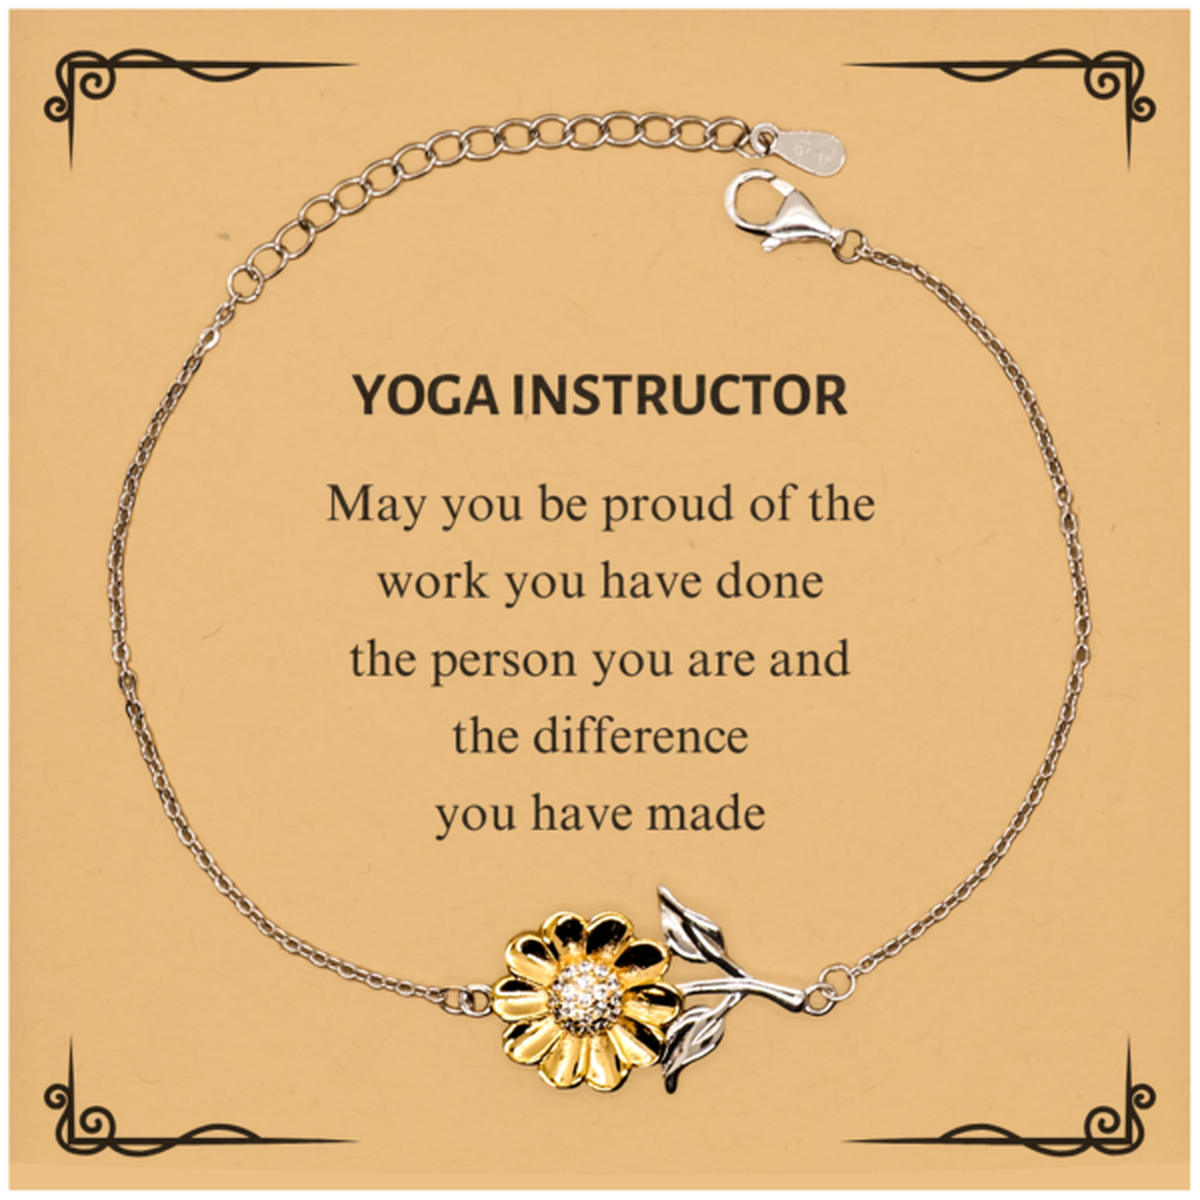 Yoga Instructor May you be proud of the work you have done, Retirement Yoga Instructor Sunflower Bracelet for Colleague Appreciation Gifts Amazing for Yoga Instructor